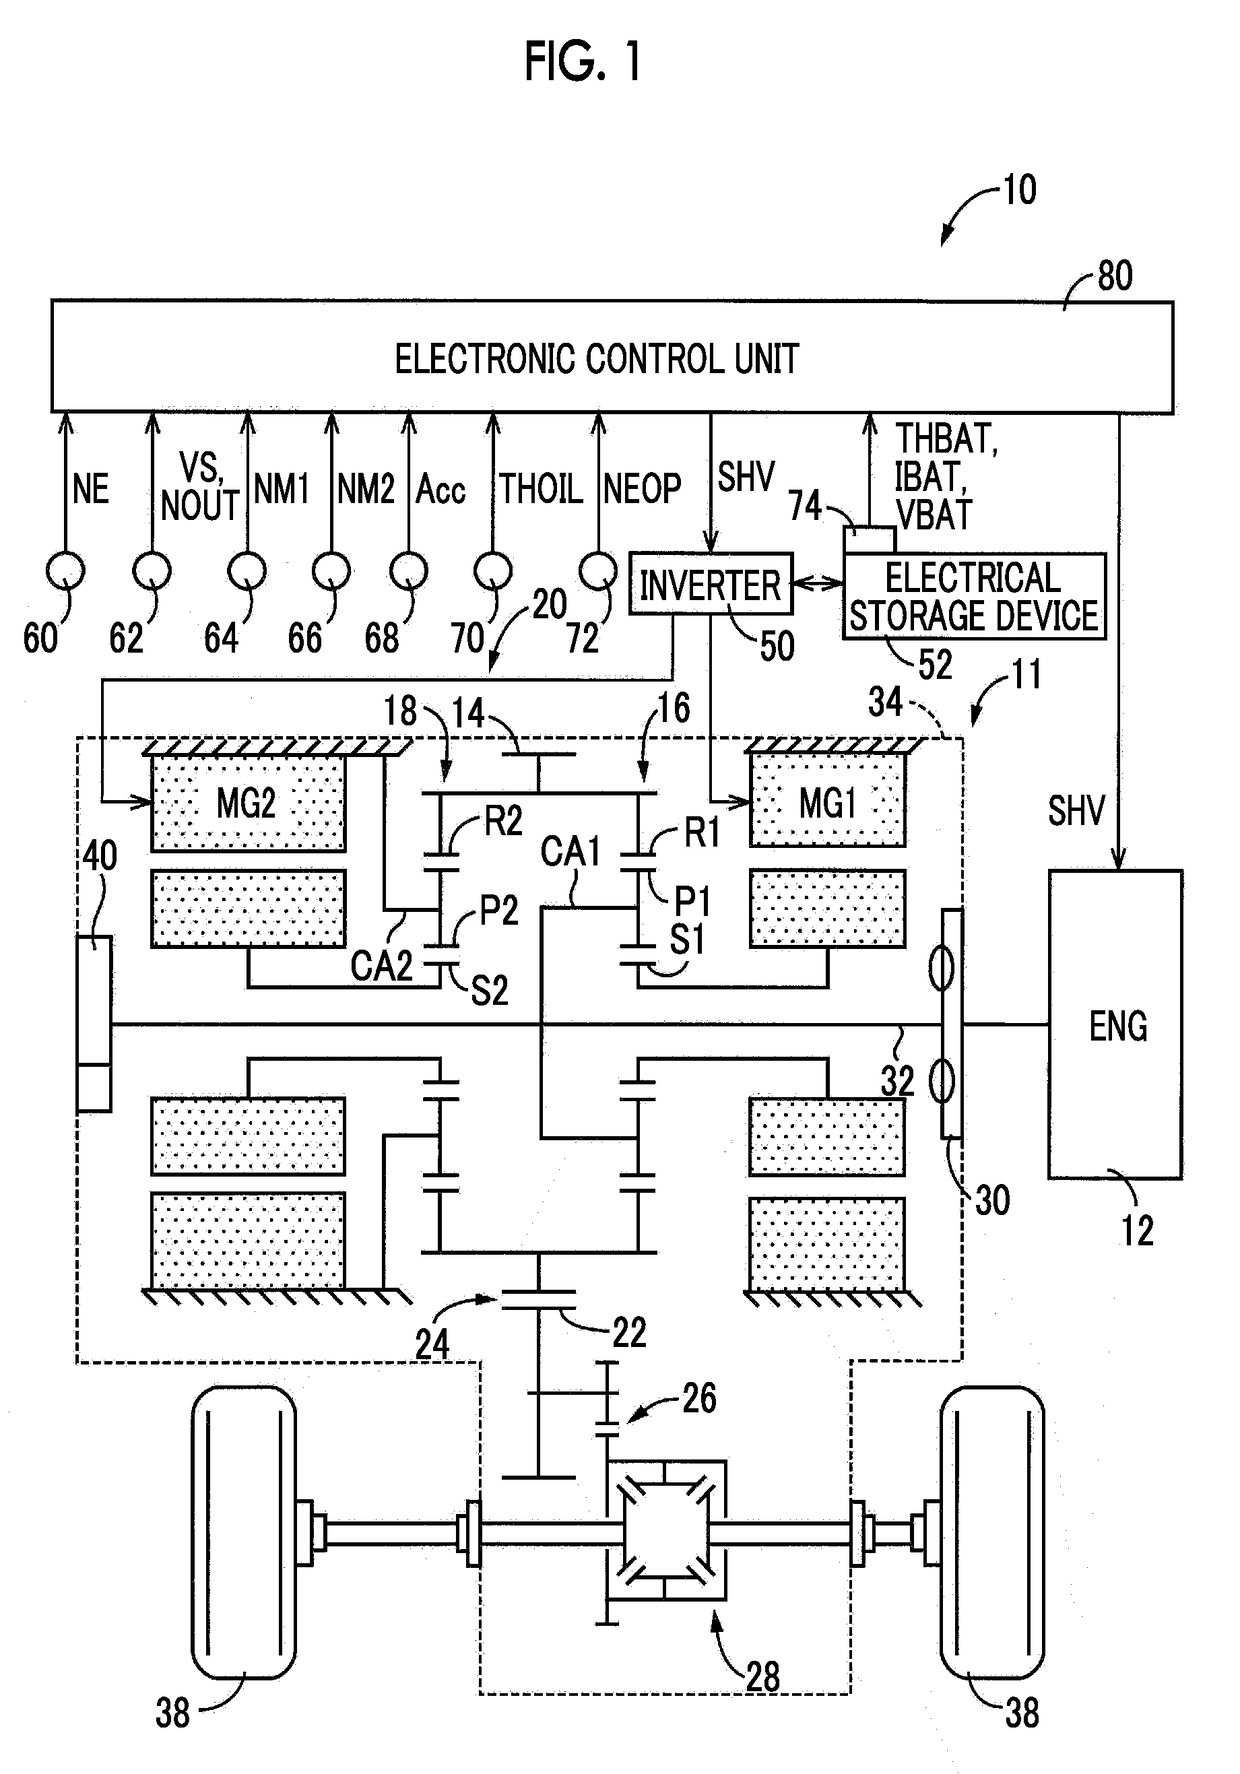 Power Transmission System For Vehicle